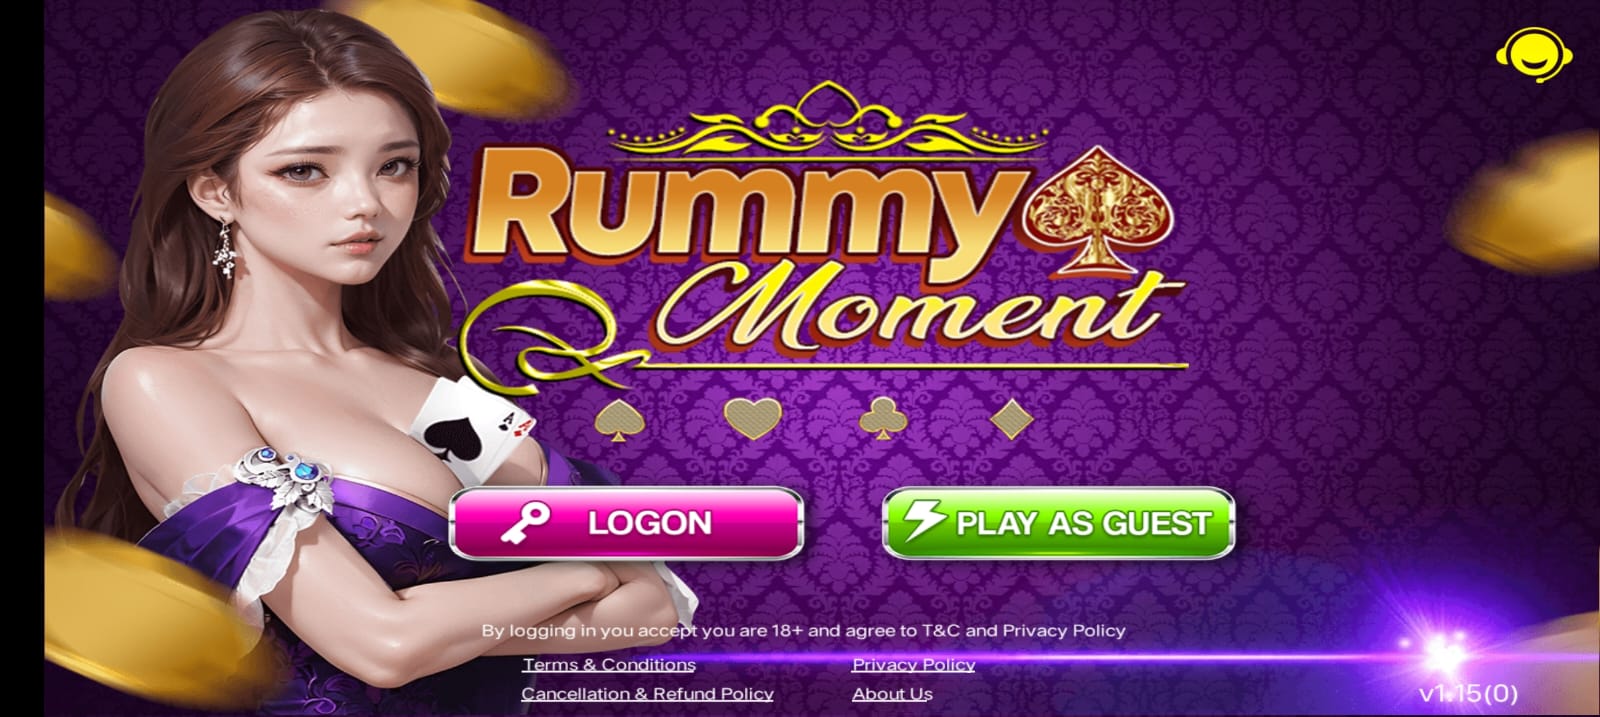 How To Register A New Account On Moment Rummy Application ?